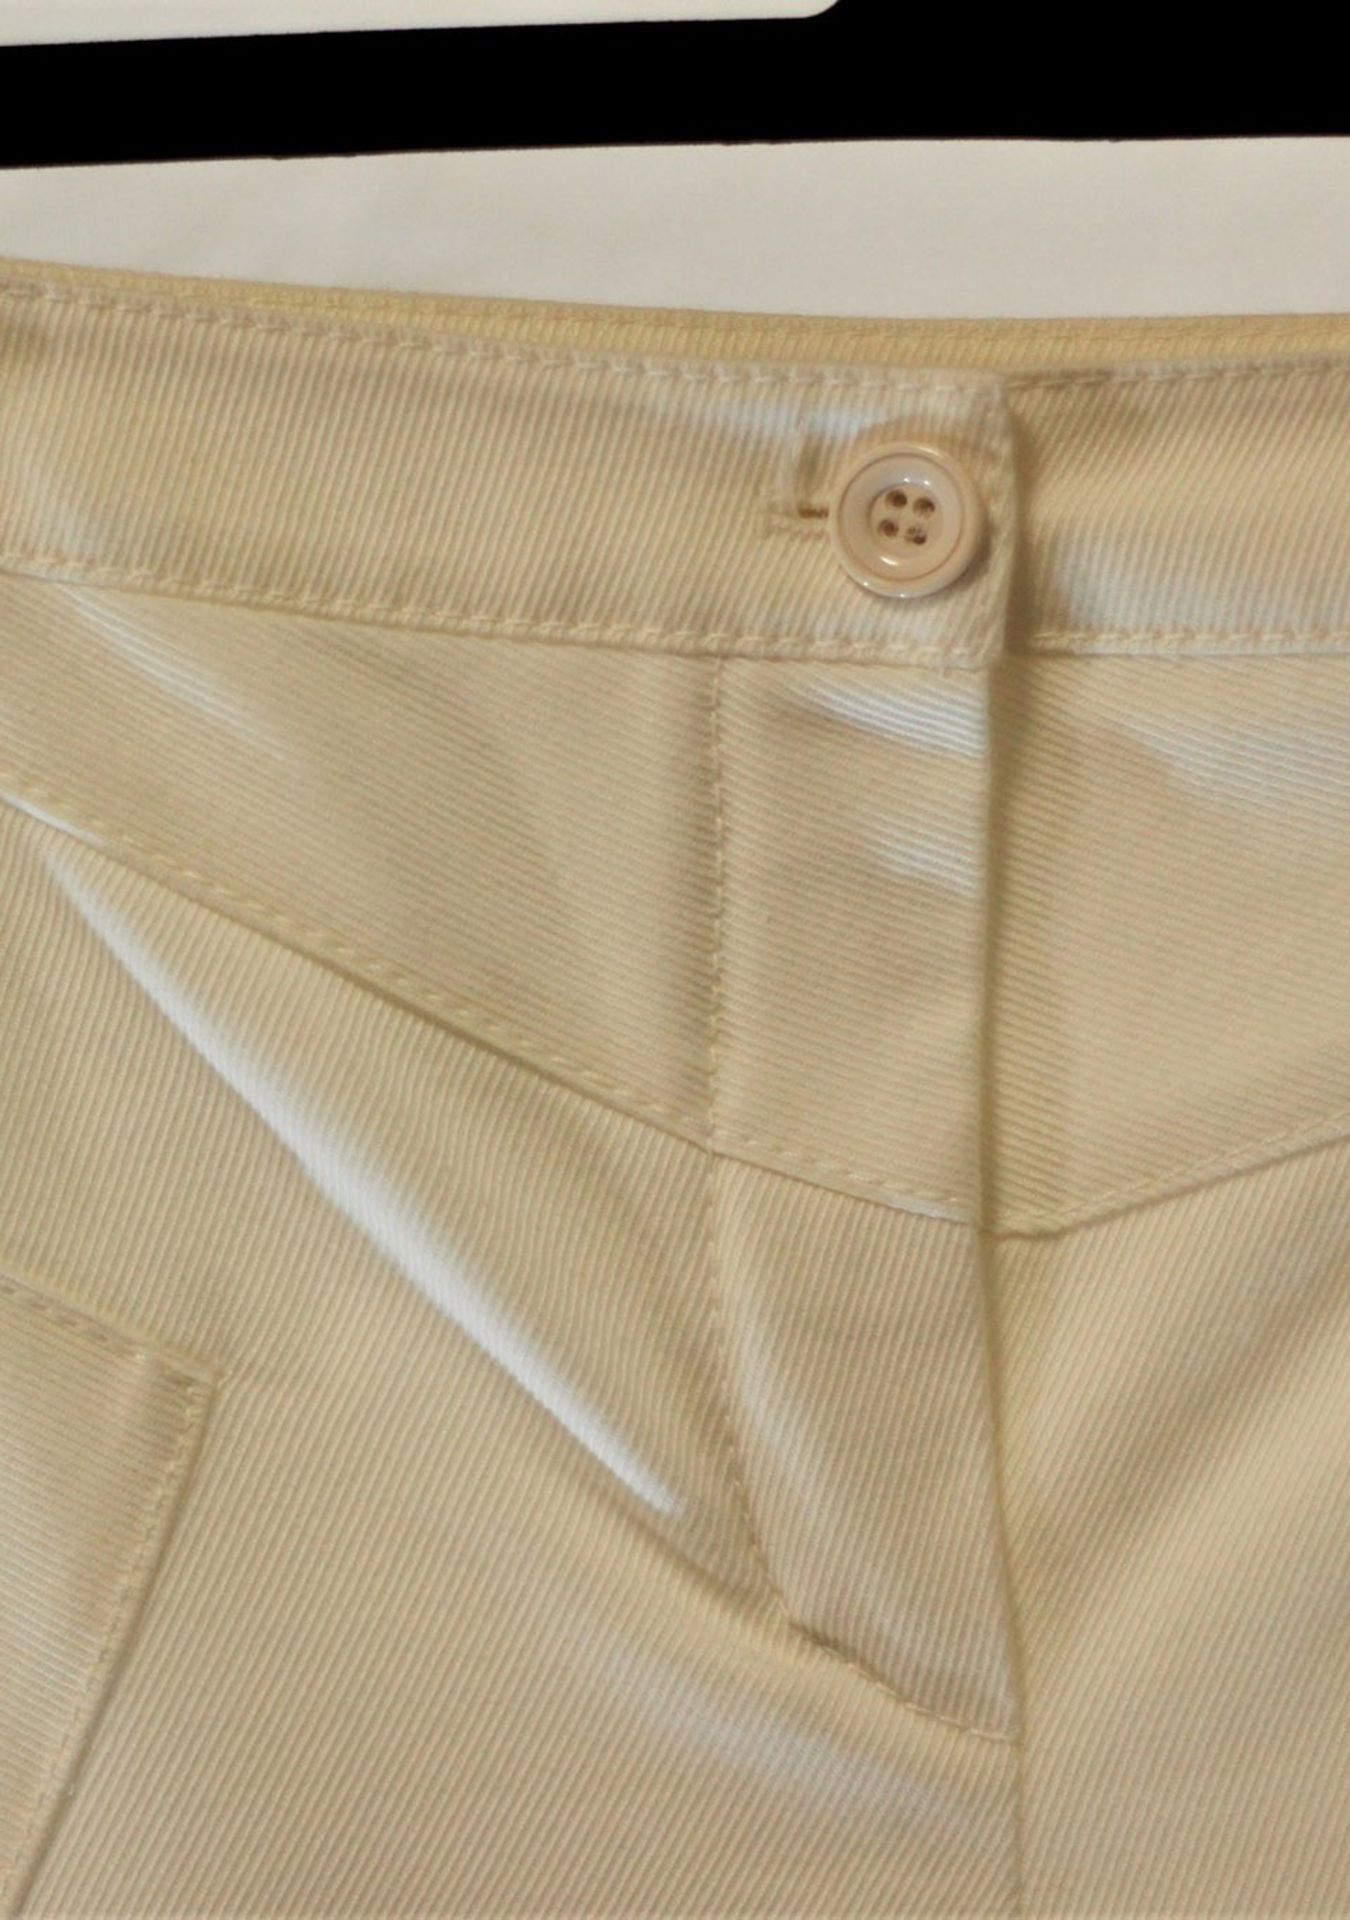 1 x Valentino Cream Trousers - Size: 10 - Material: 98% Cotton, 2% Elastane. Lining 100% Polyester - - Image 2 of 5